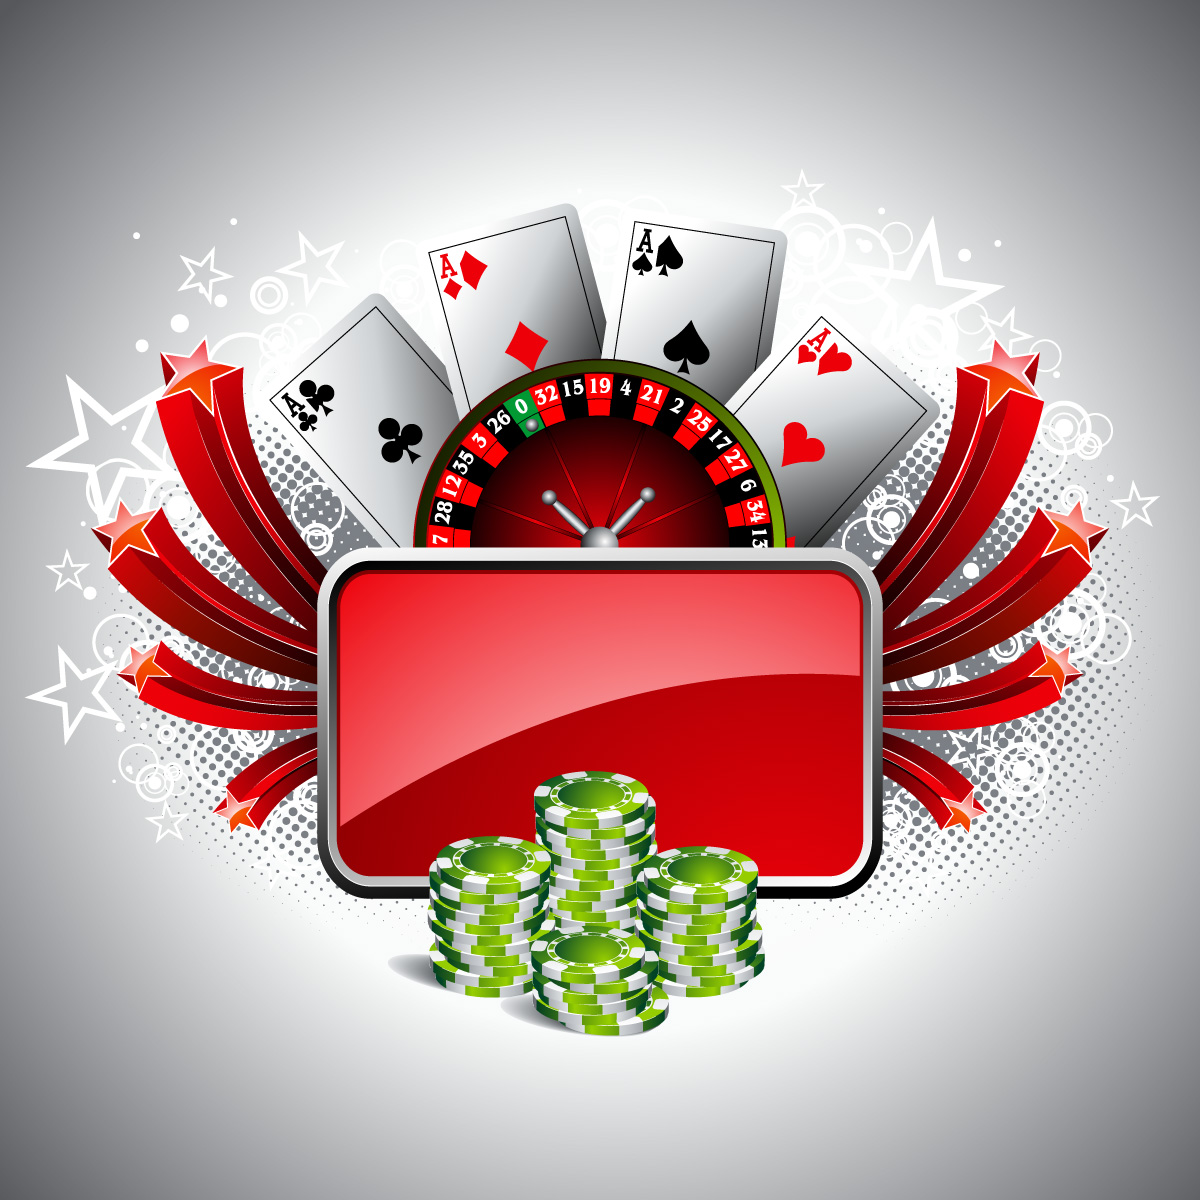 bet at home online casino